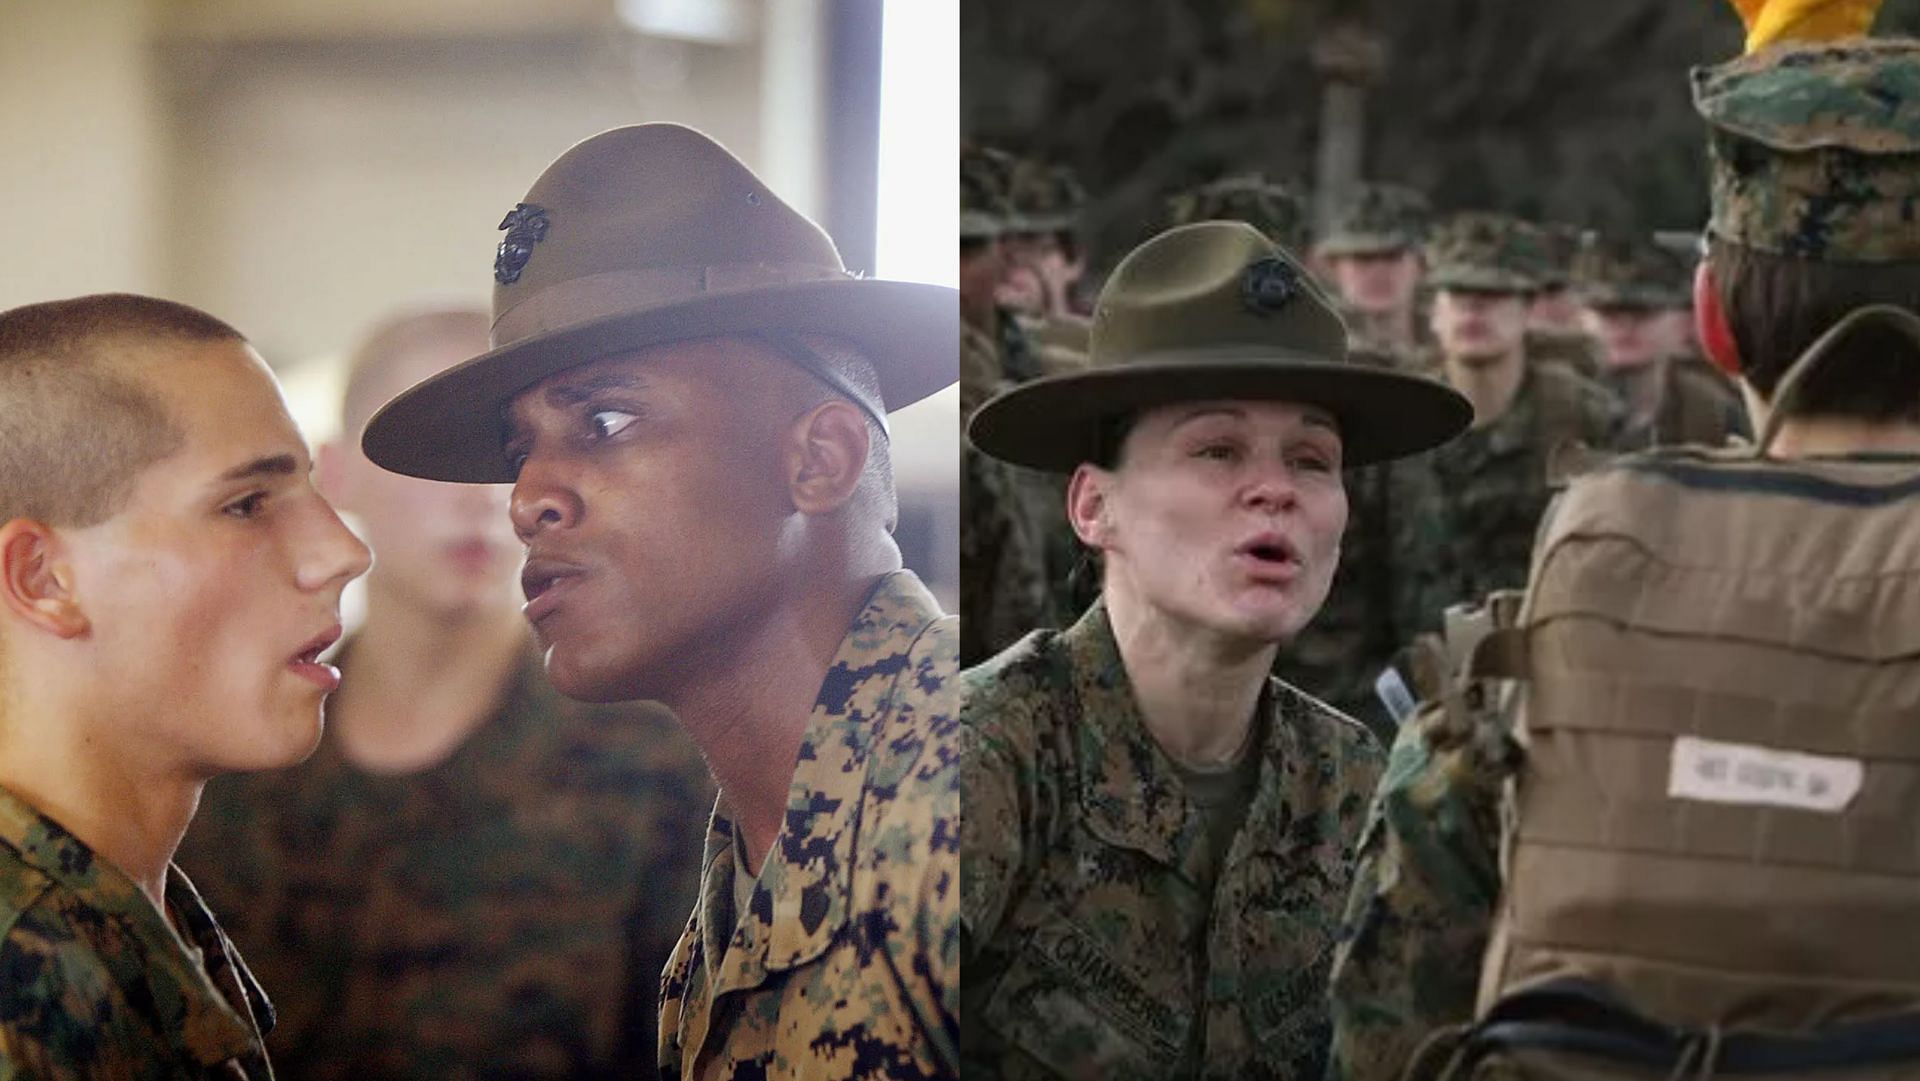 The U.S. Marines may be asked to stop using &quot;sir&quot; or &quot;ma